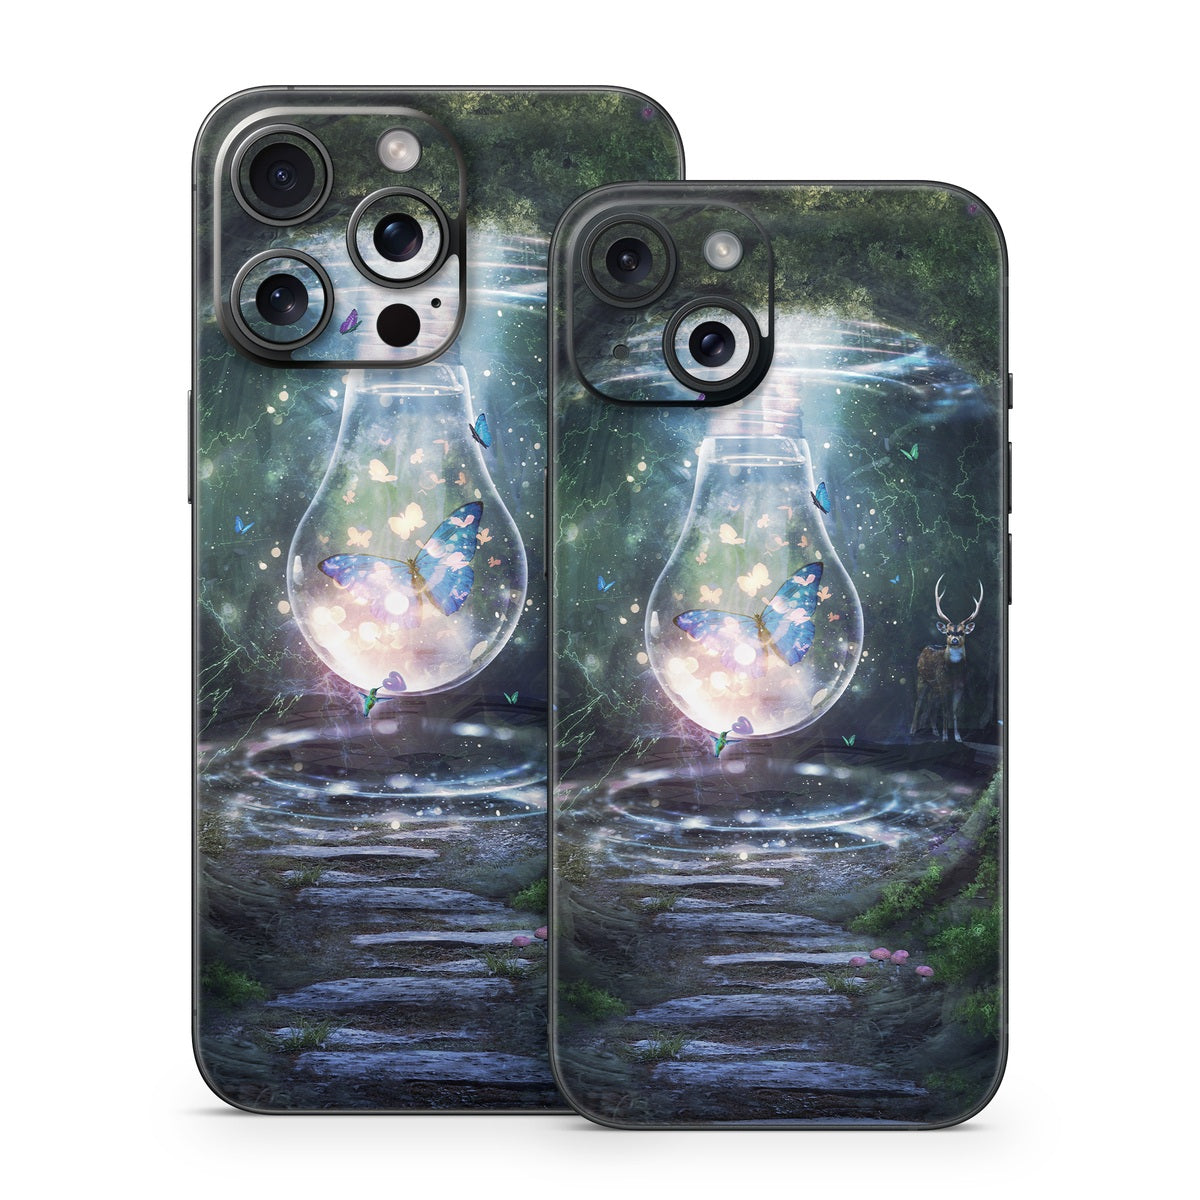 For A Moment - Apple iPhone 15 Skin